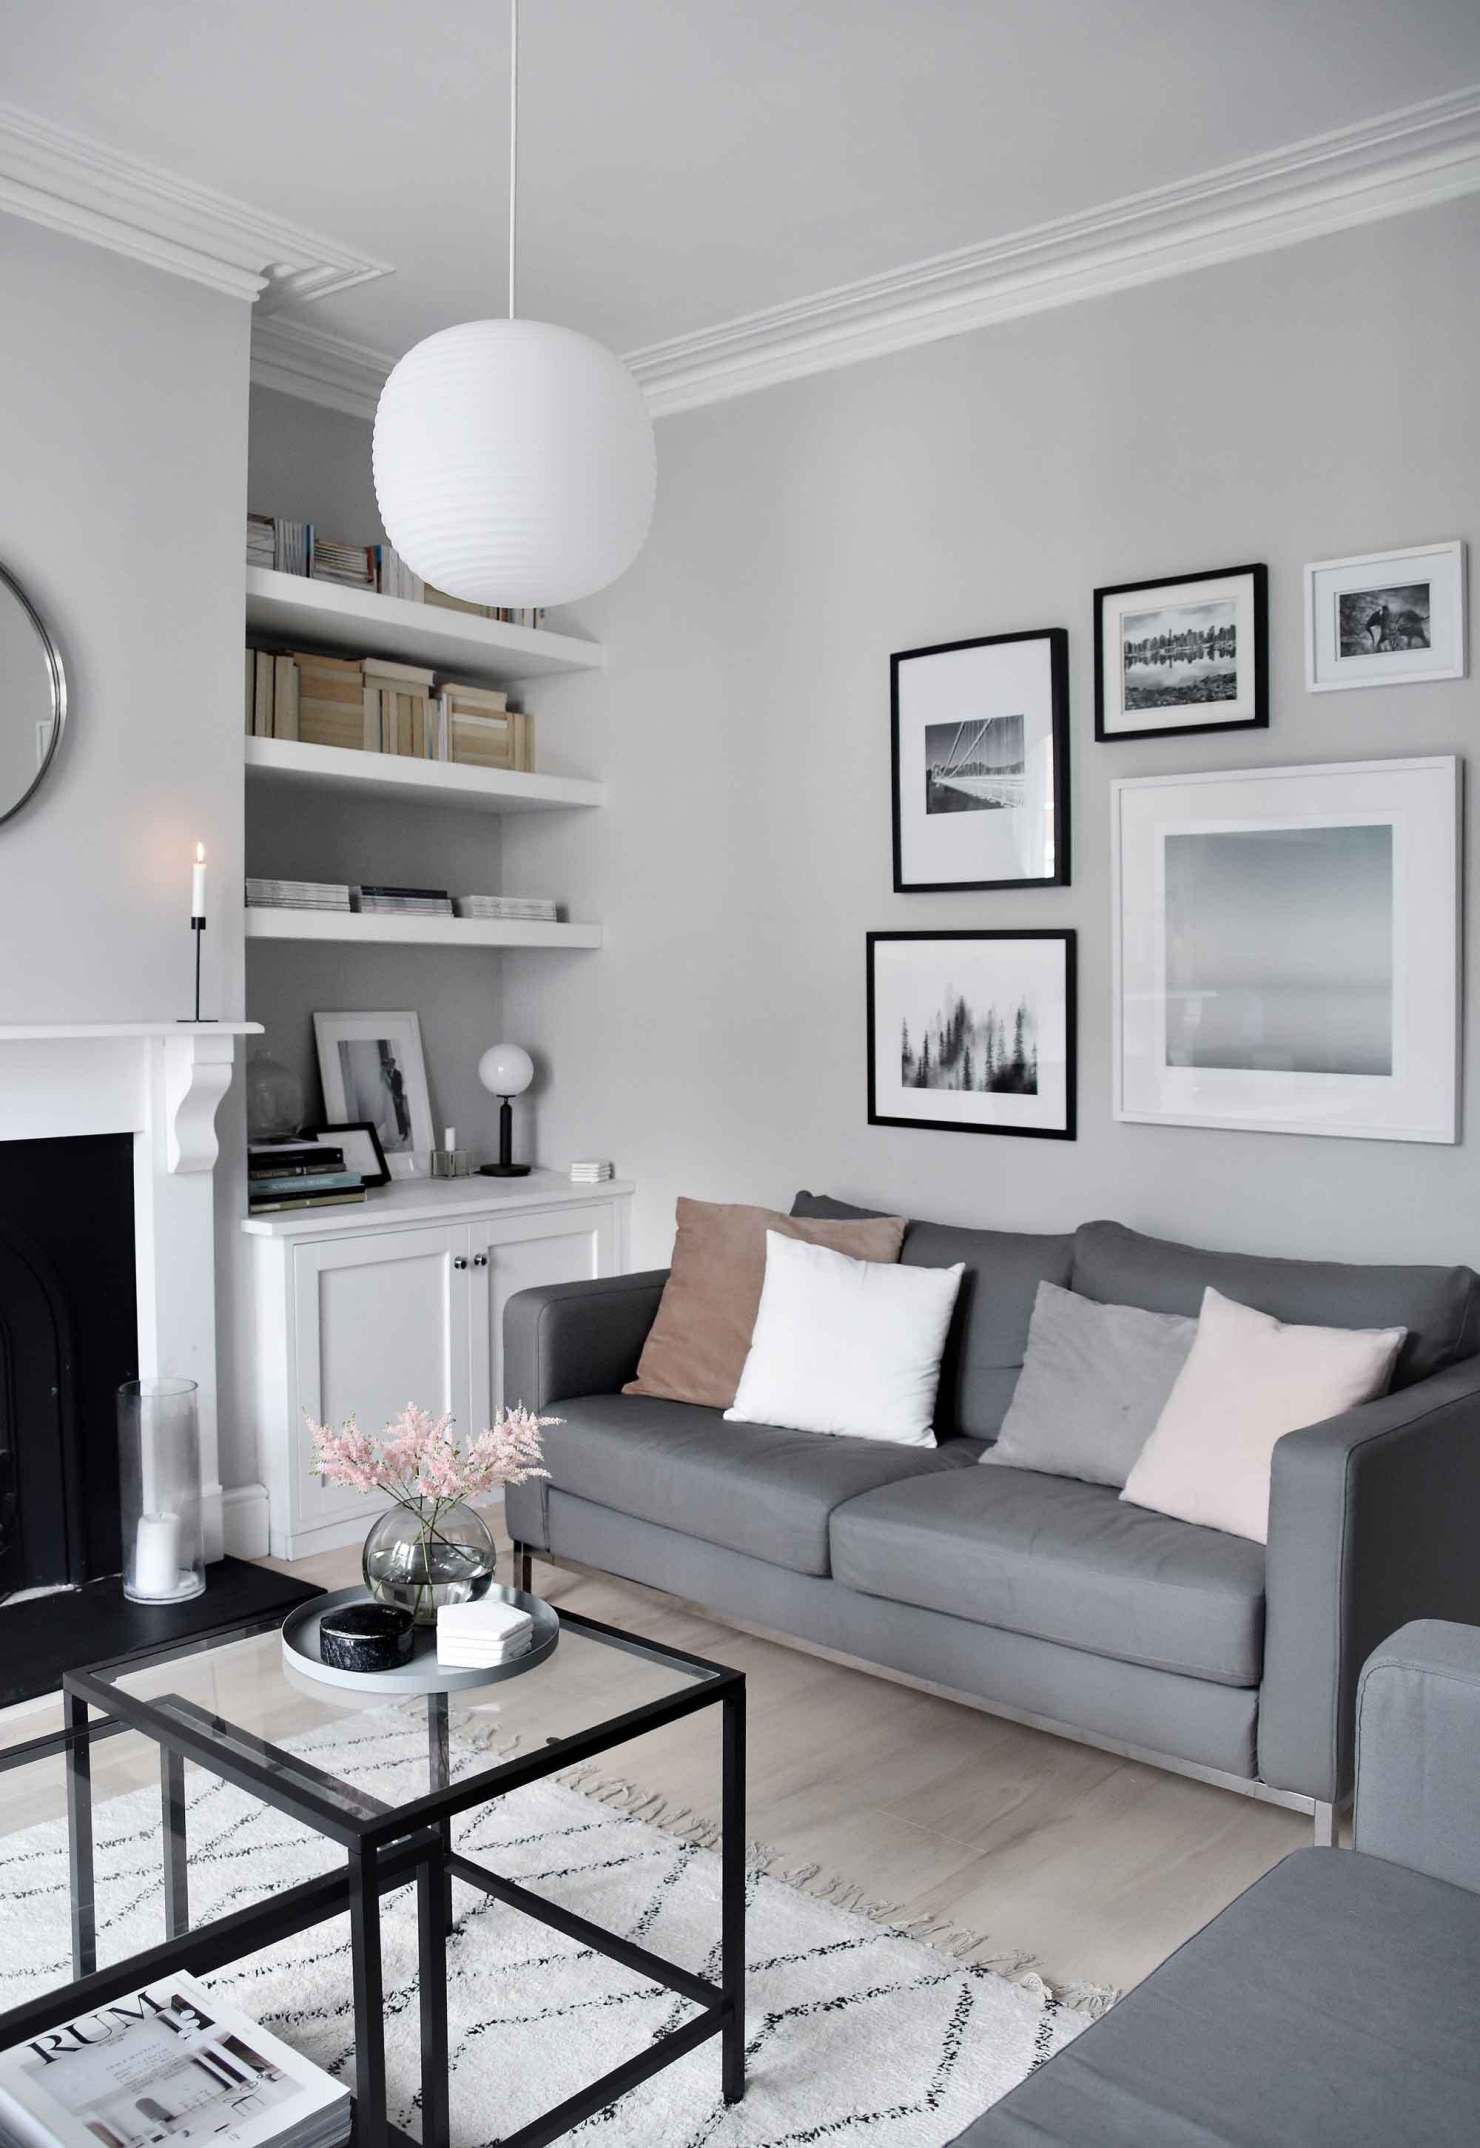 Living Room Decorating Ideas With Gray Walls - 21 Gray Living Room ...